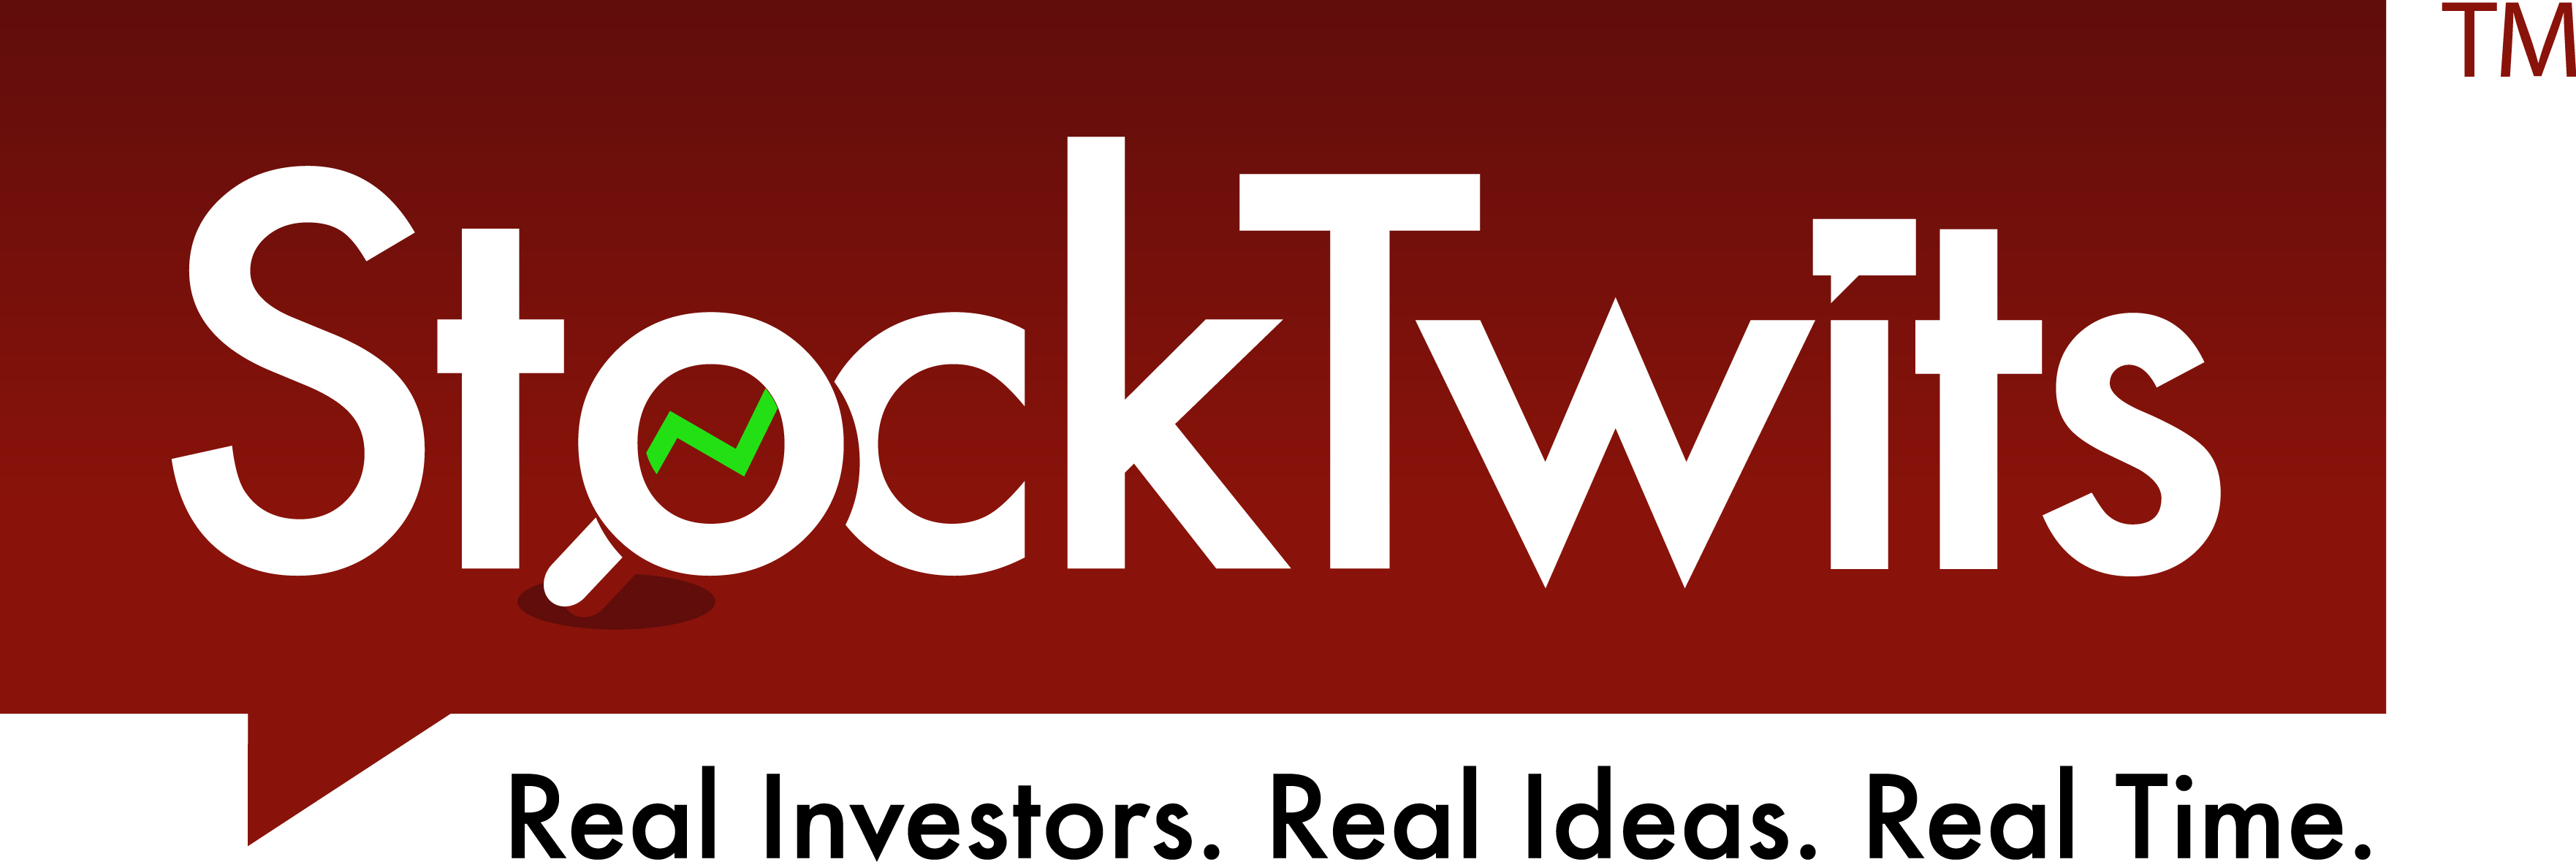 StockTwits growing, hiring, and portalizing